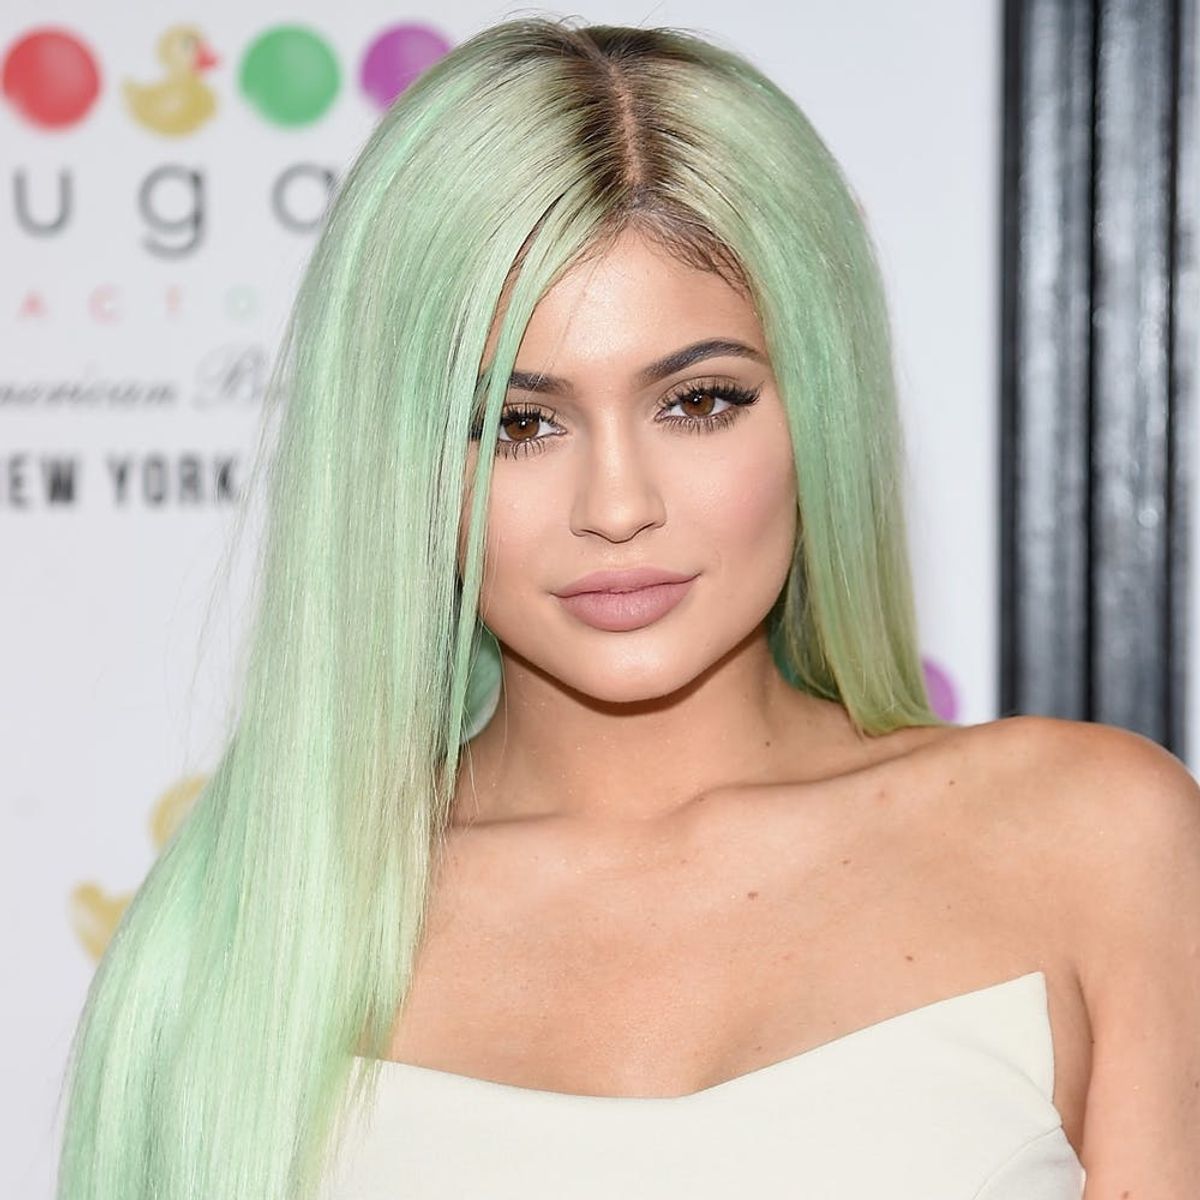 Here’s Why Kylie Jenner Is Ready to Throw in the Towel on Her Famous Wig Collection